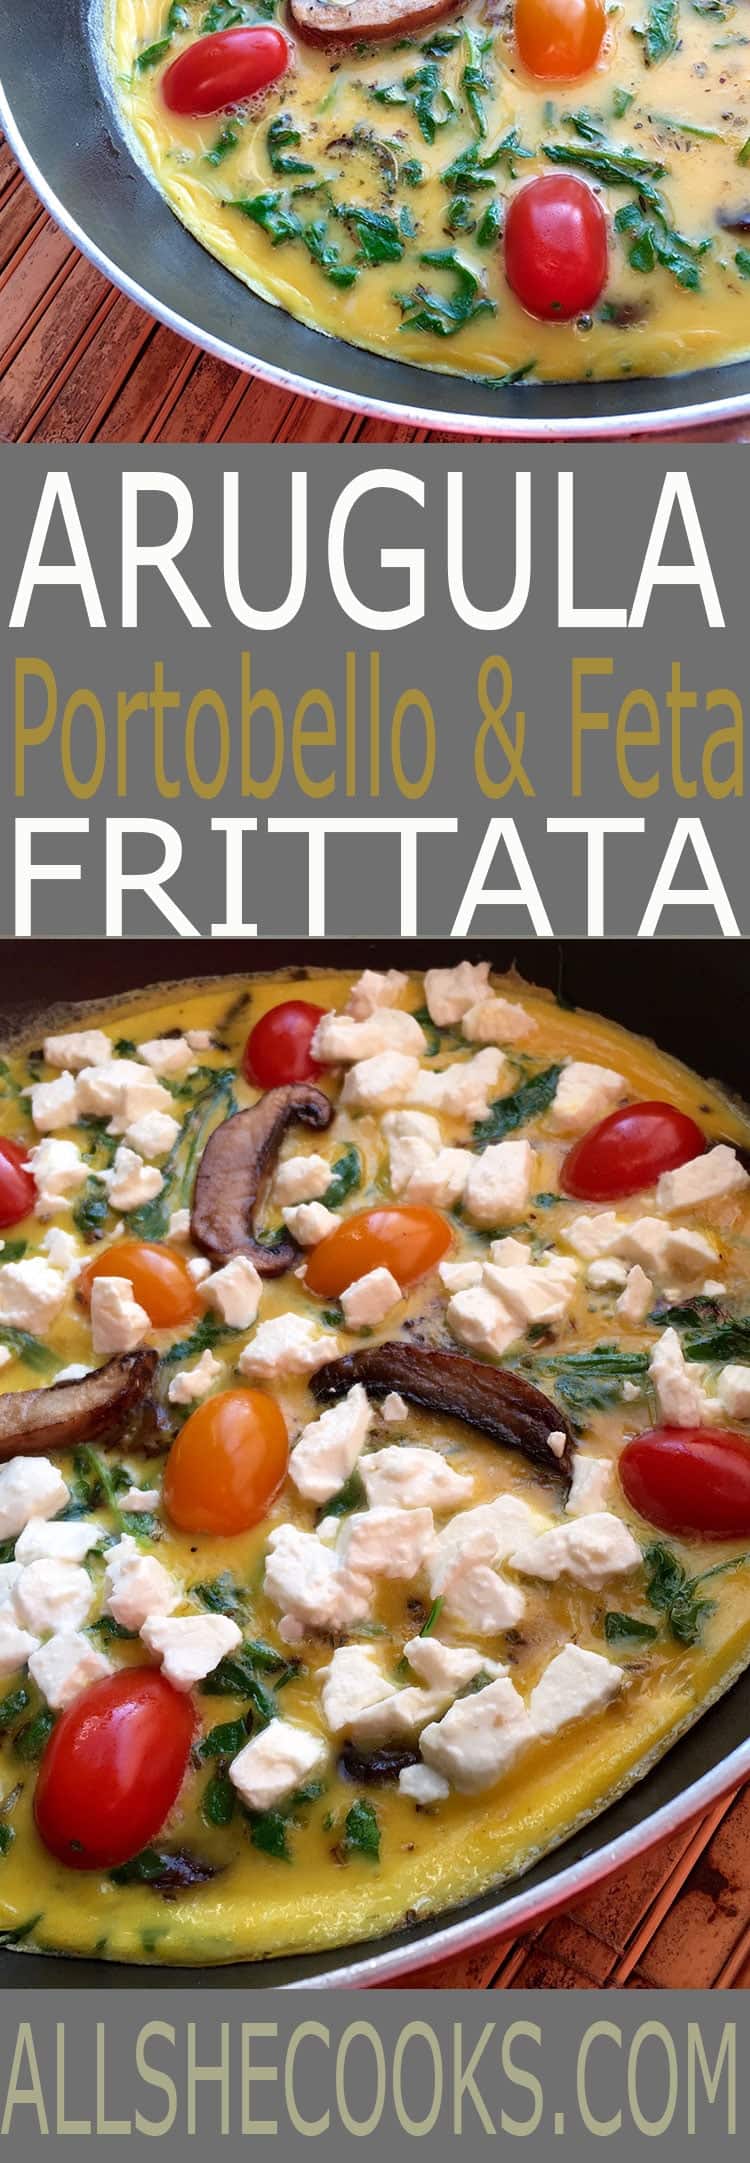 Enjoy this tasty Arugula, Portobello and Feta Frittata. This is an easy breakfast or lunch recipe you won't want to miss.